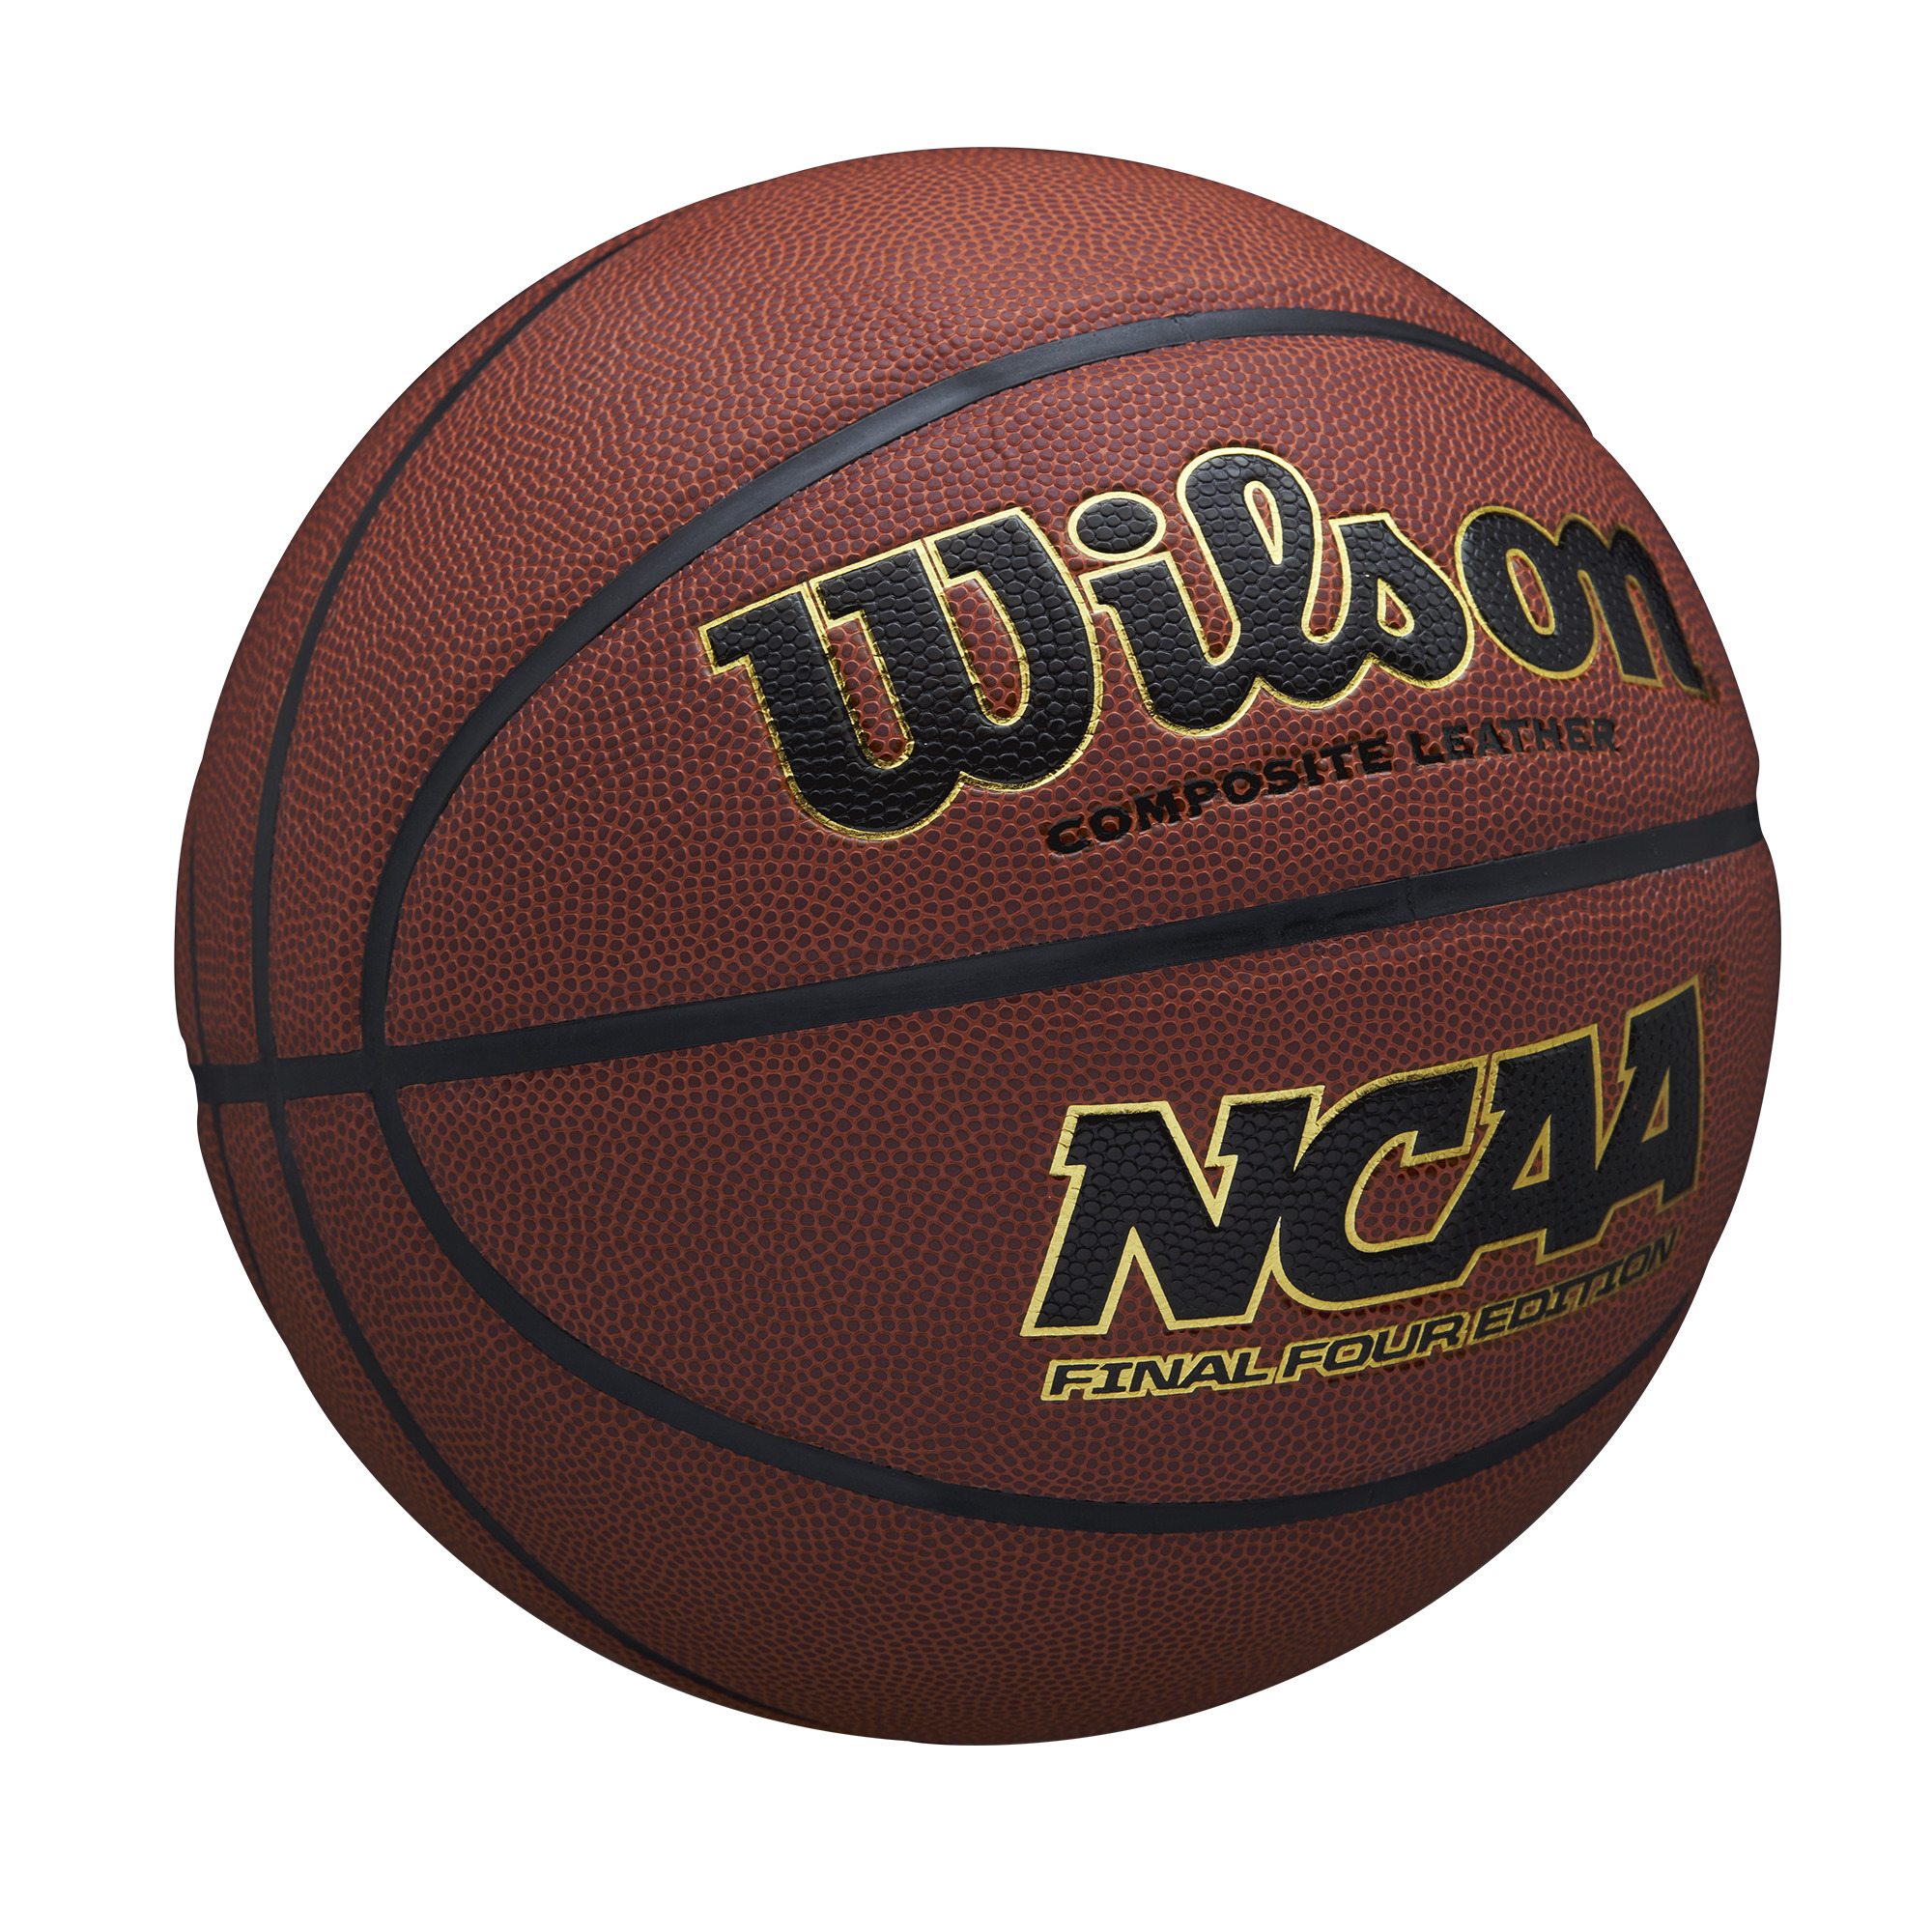 Wilson NCAA Final Four Edition Basketball, Official Size - 29.5" - image 5 of 7